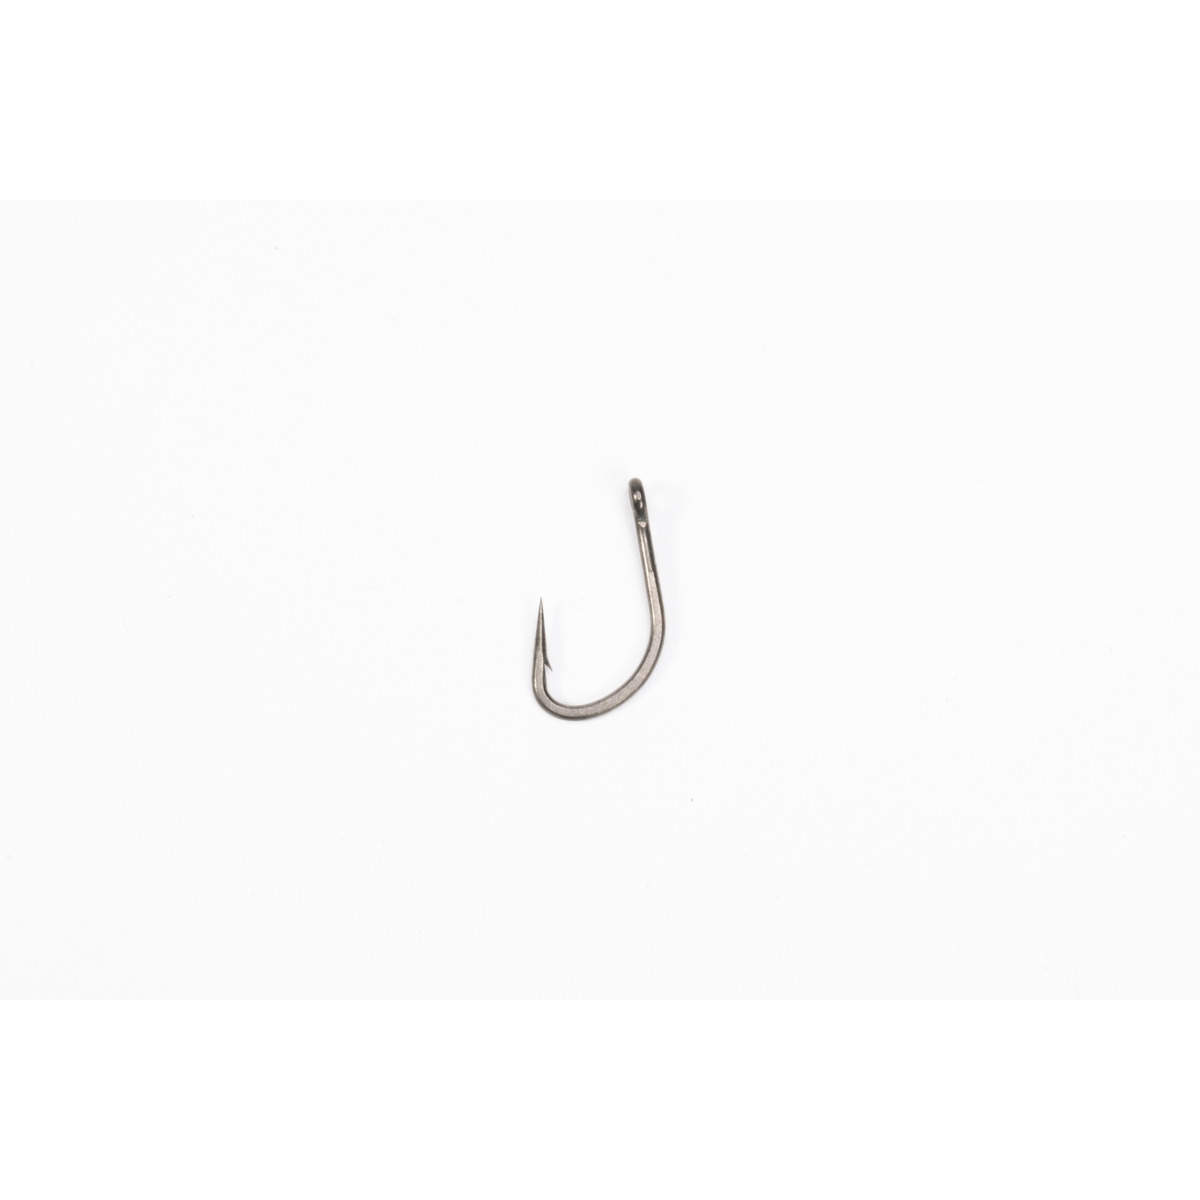 Nash Pinpoint Brute - Size 4 Micro Barbed